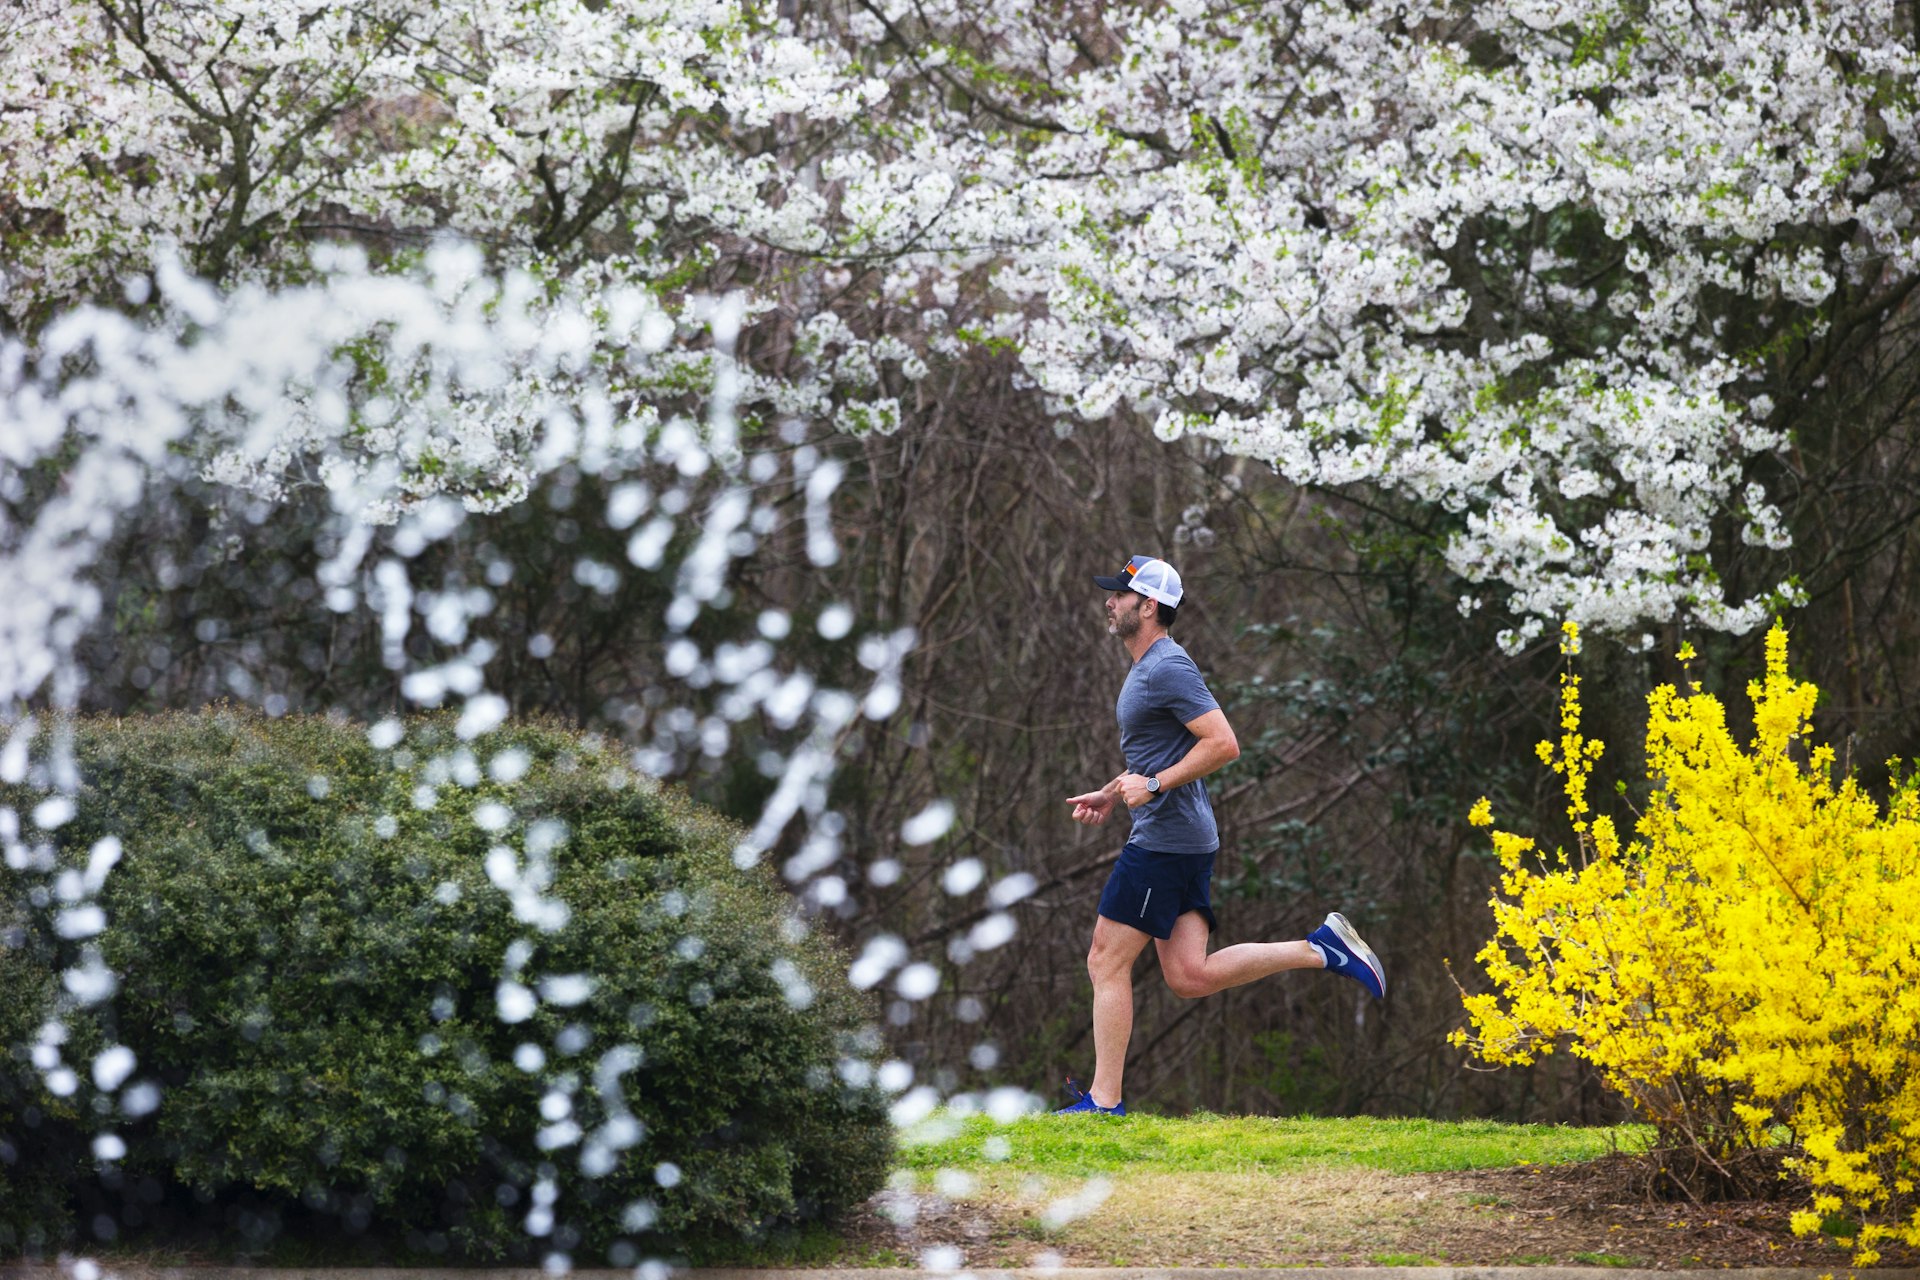 Former NASCAR driver Jimmie Johnson runs around Freedom Park in Charlotte, NC during the spring. The trees are in full bloom. 